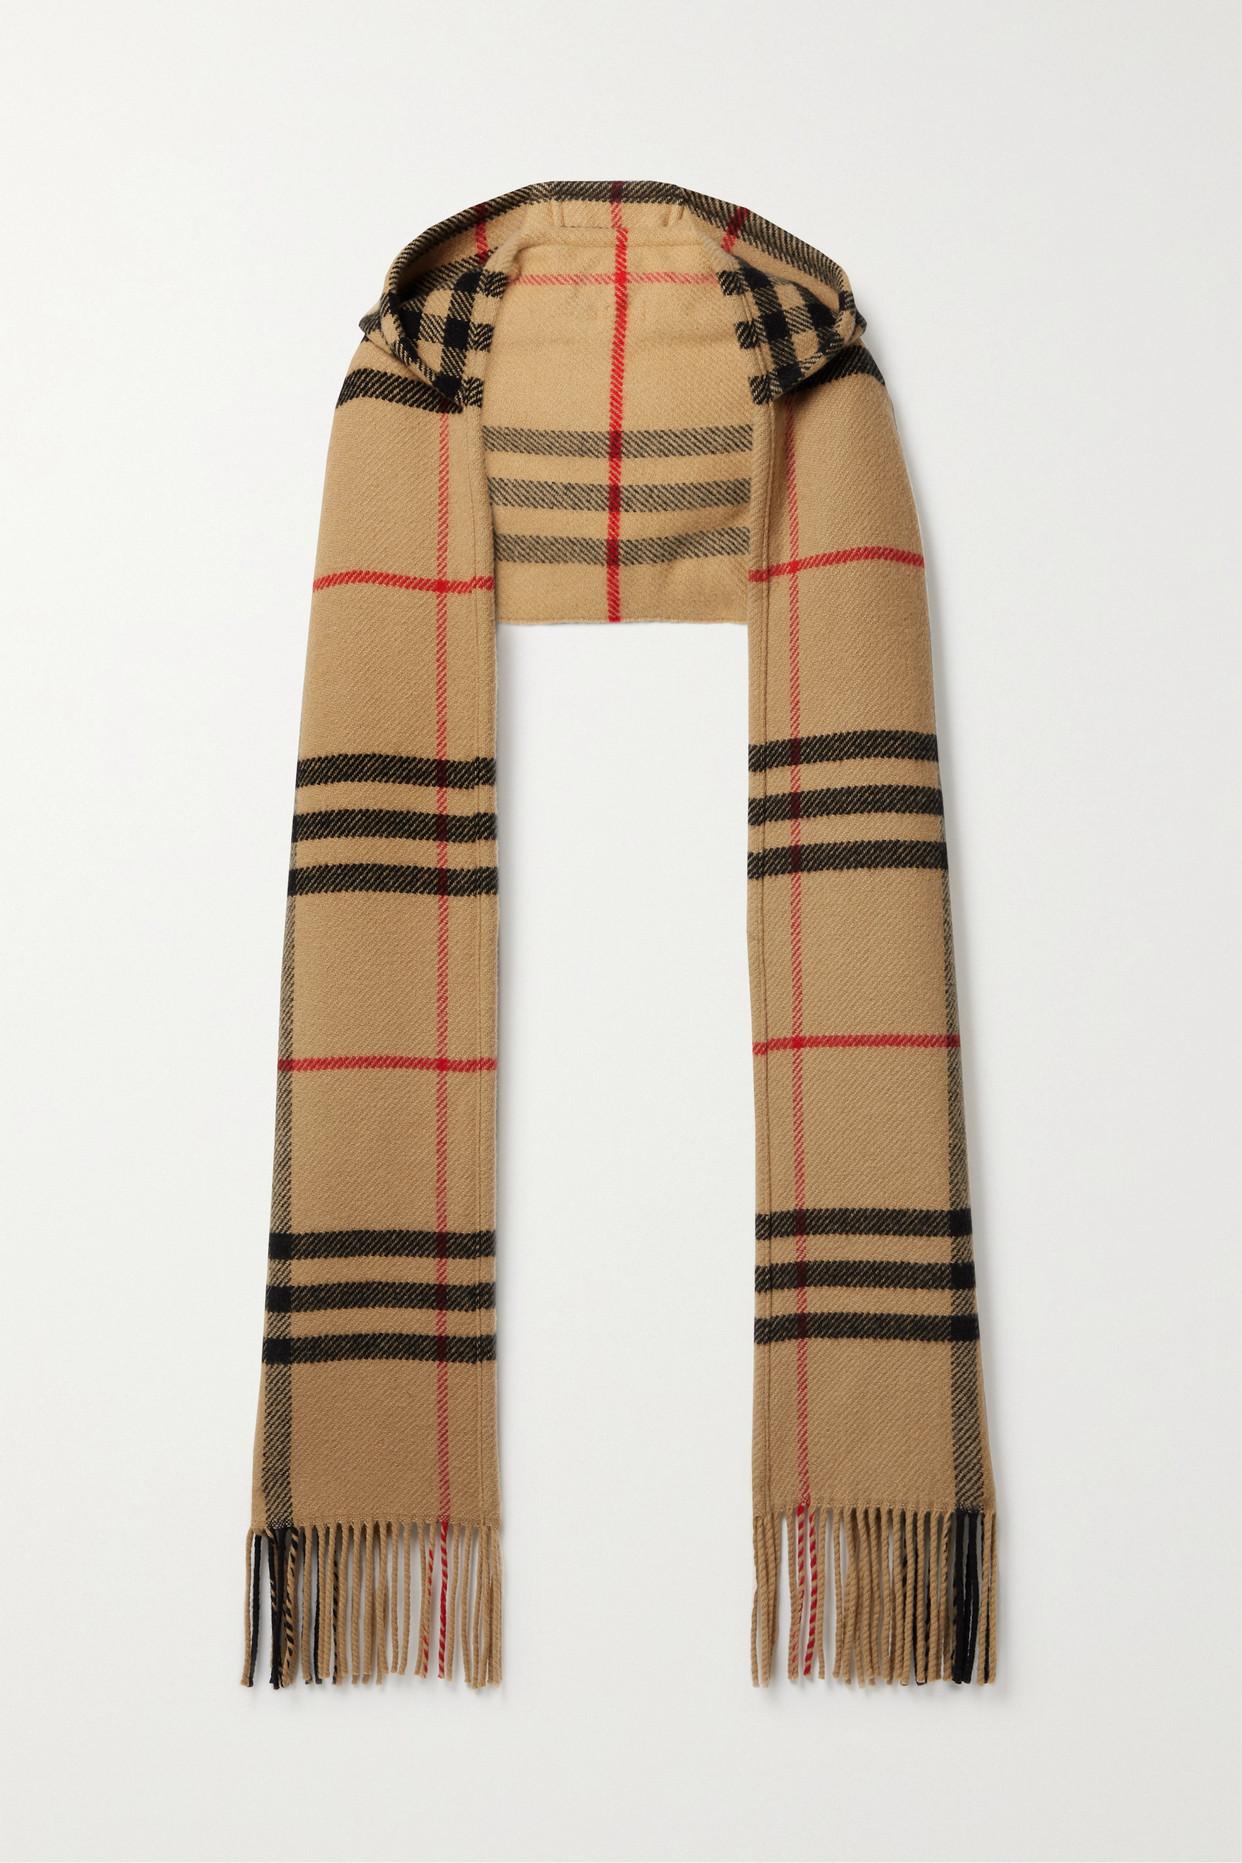 BURBERRY: Vintage Check Scarf in printed cashmere - Brown